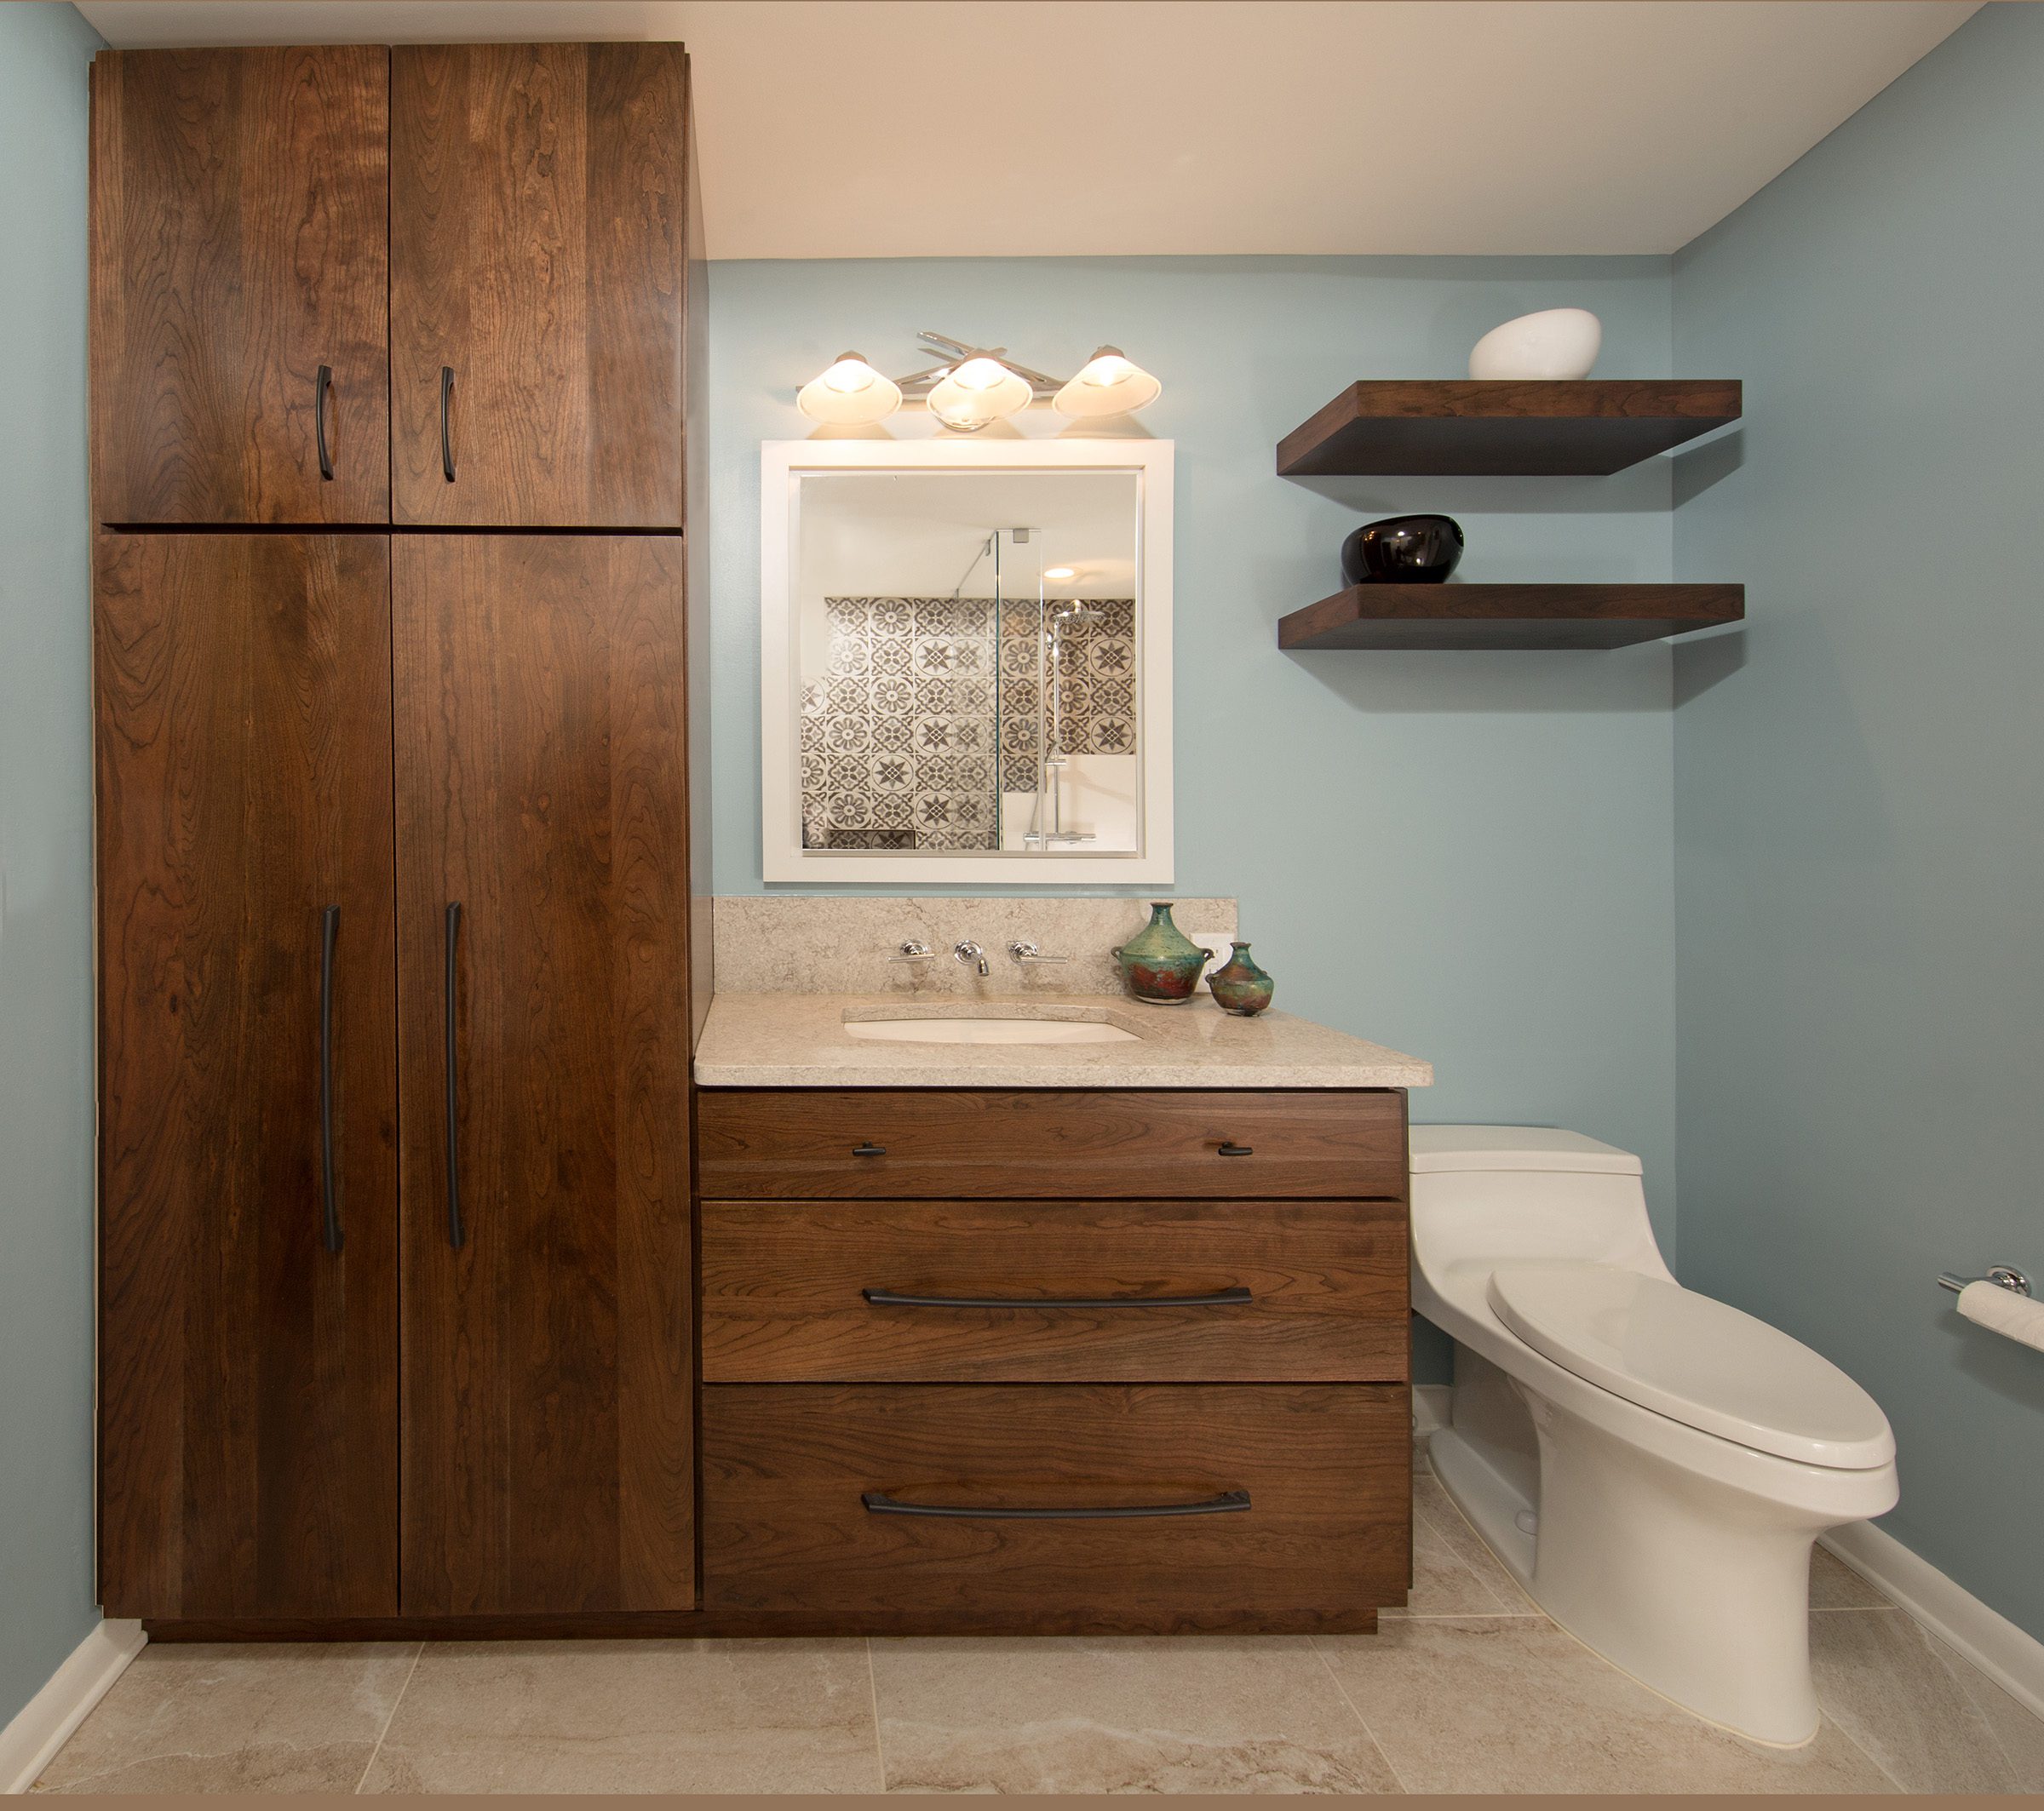 A photo of a European style modern bathroom with tall storage units